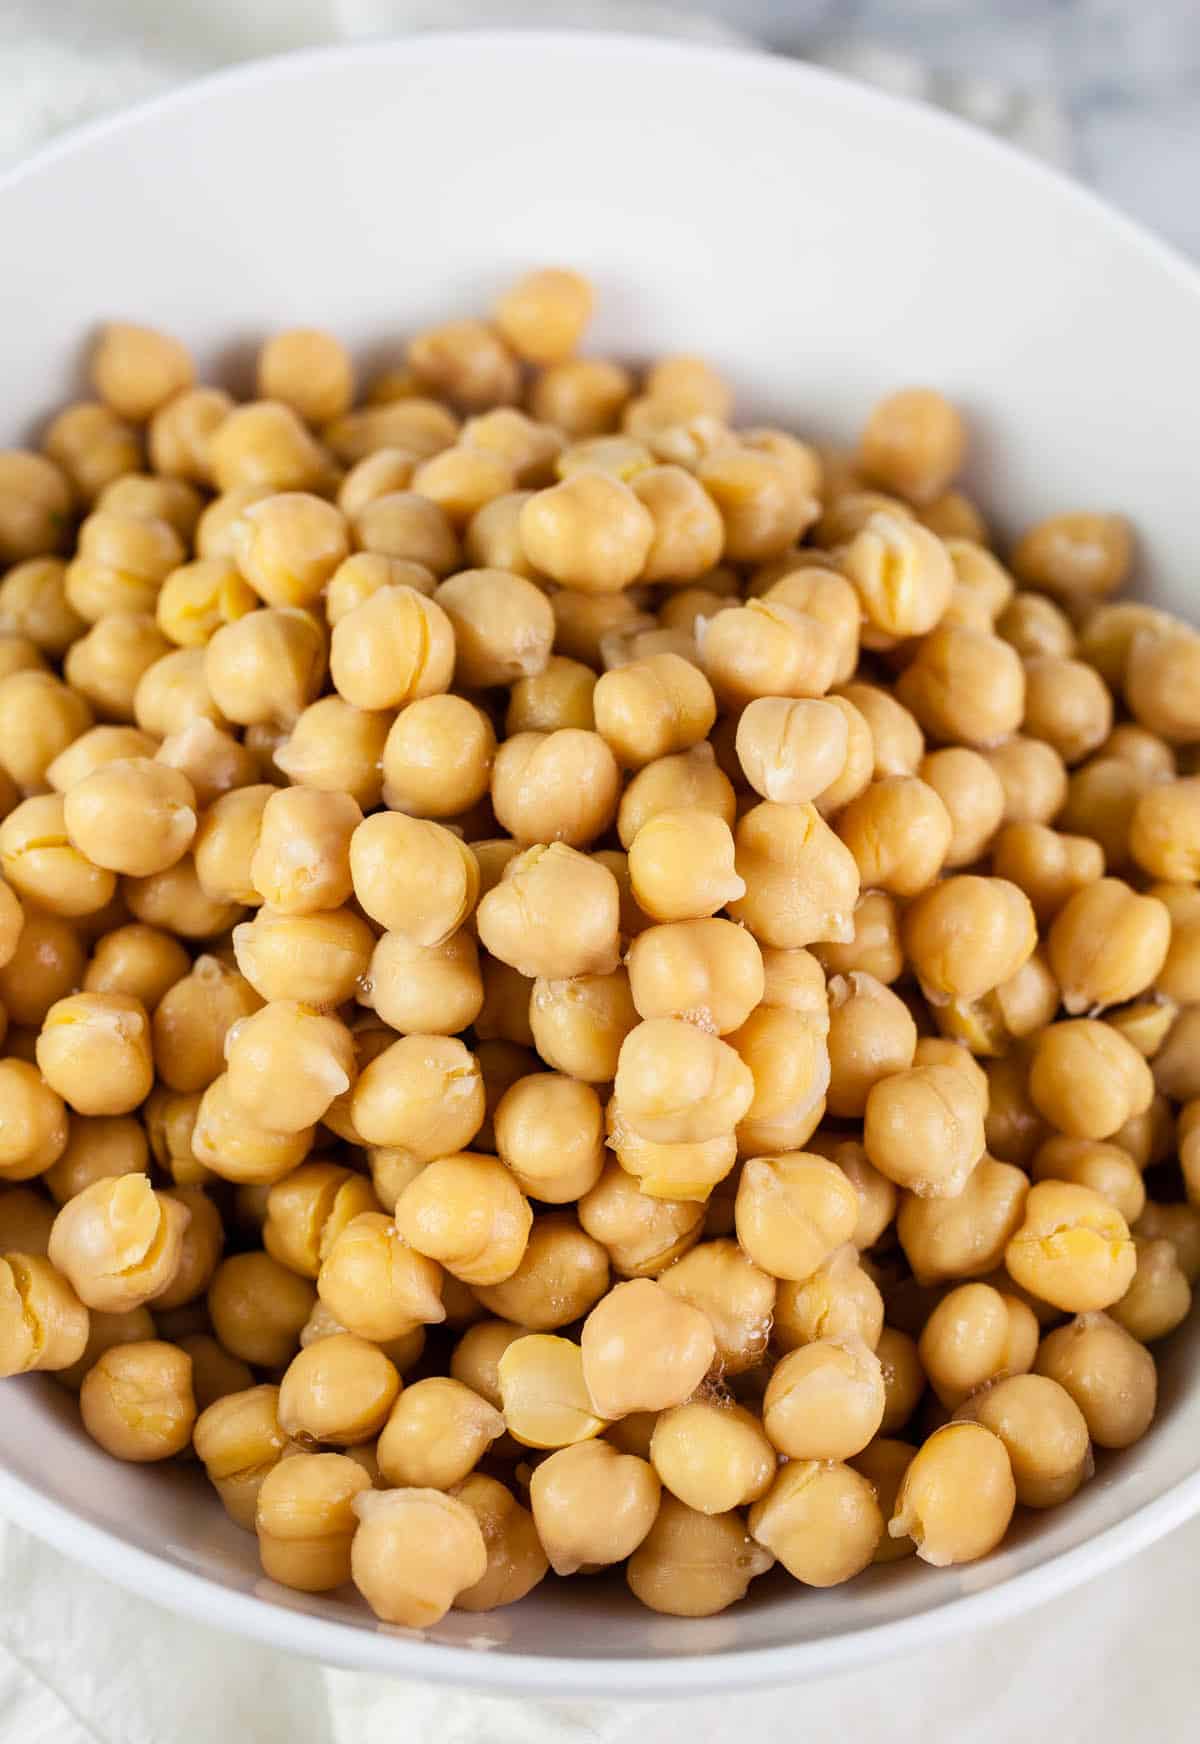 Rinsed canned chickpeas in white bowl.